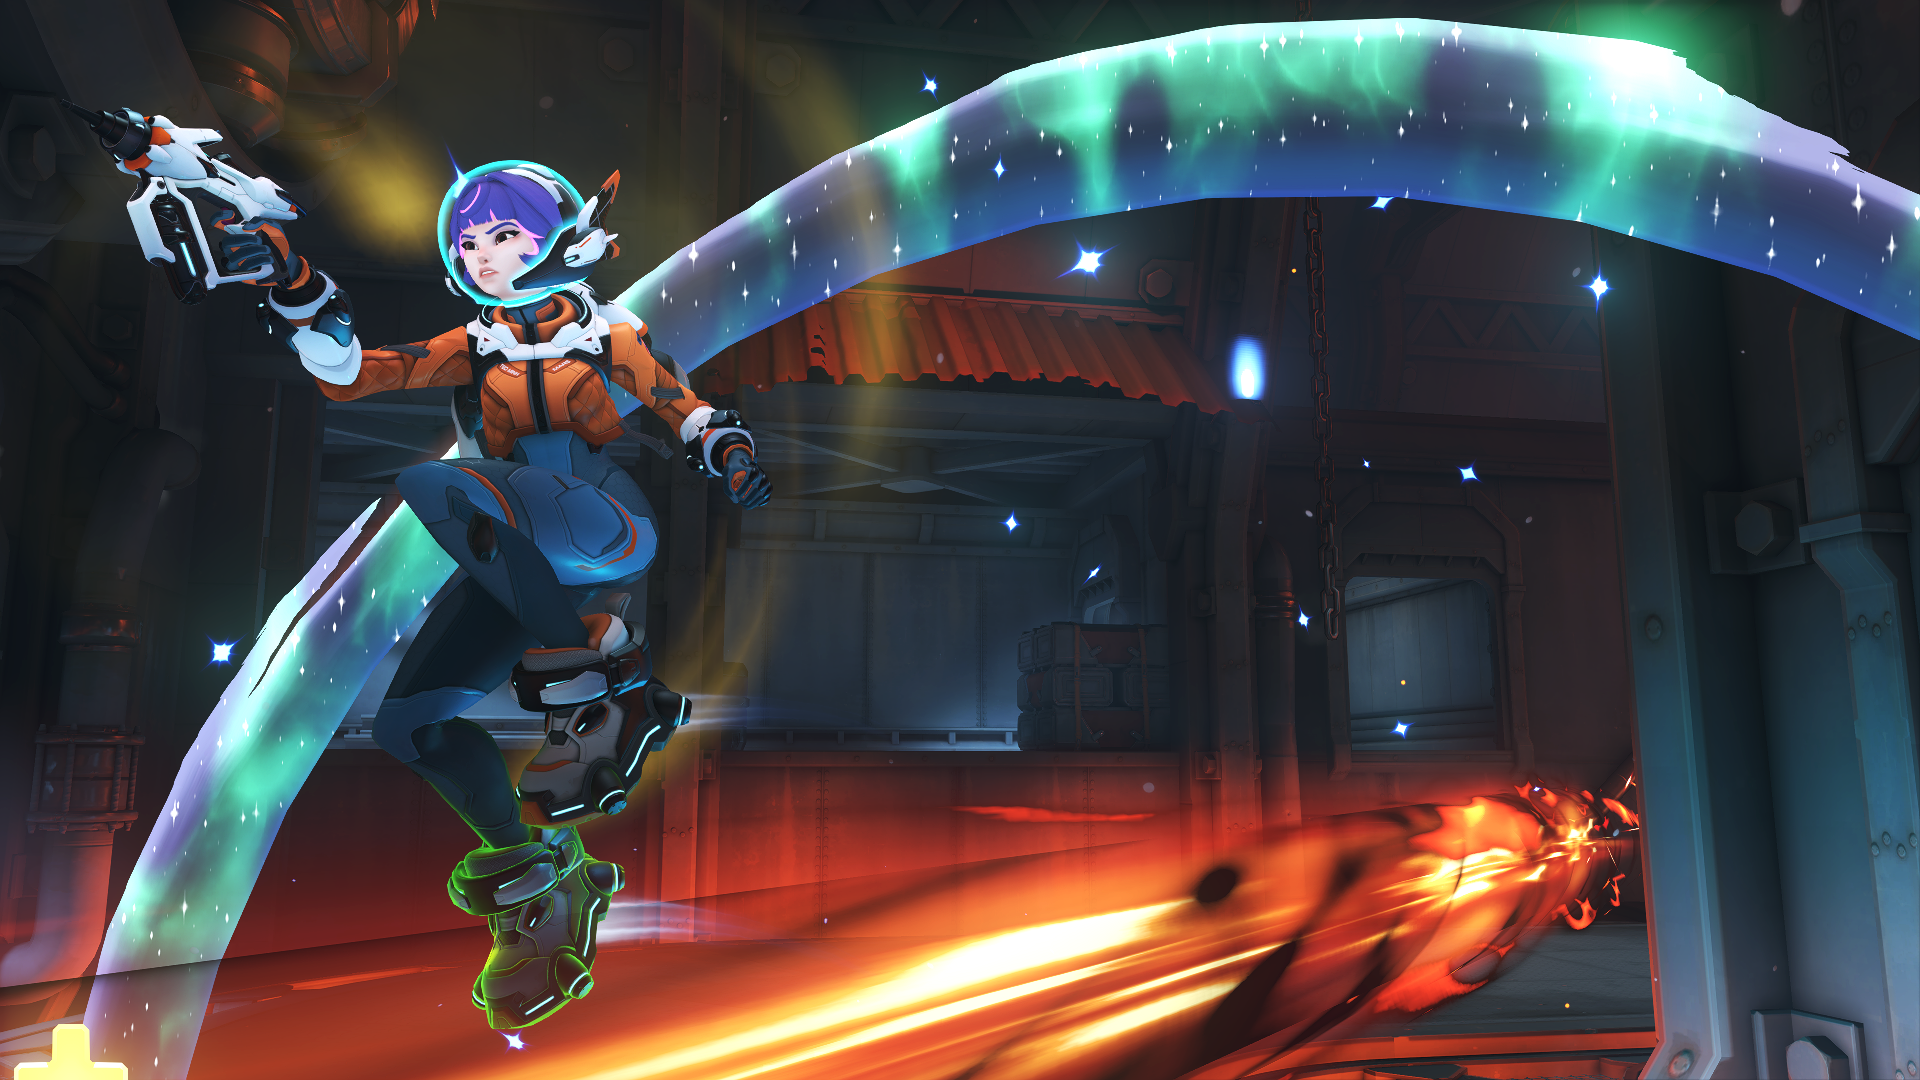 Overwatch 2’s new space girl healer takes the throne as one of the most strategically satisfying heroes in the game